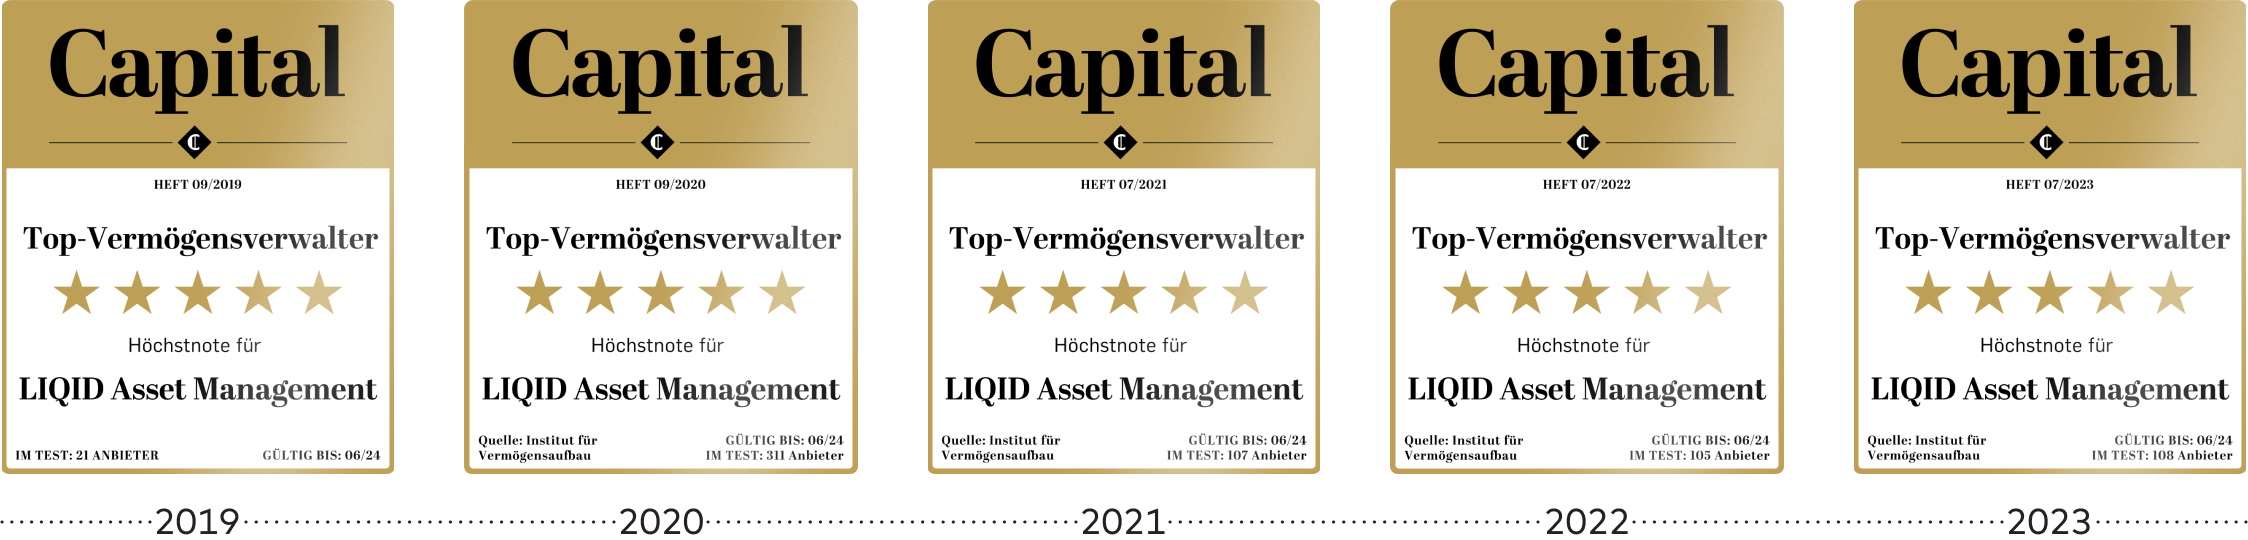 Capital_2019-2023_footer